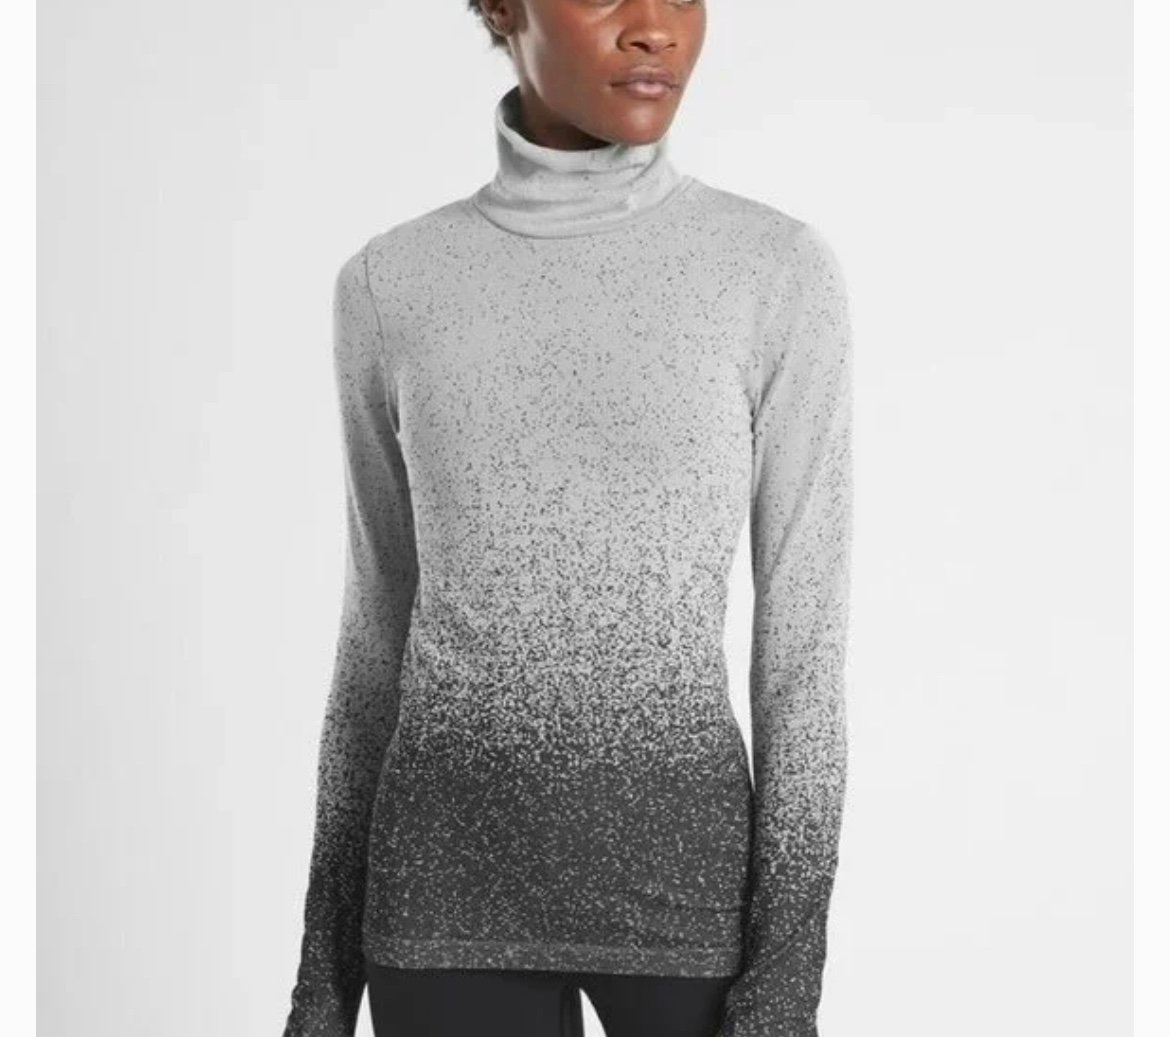 cheapest place to buy  Athleta Flurry Blizzard Gradient Turtleneck Top Size XS OTva2fgiV just for you